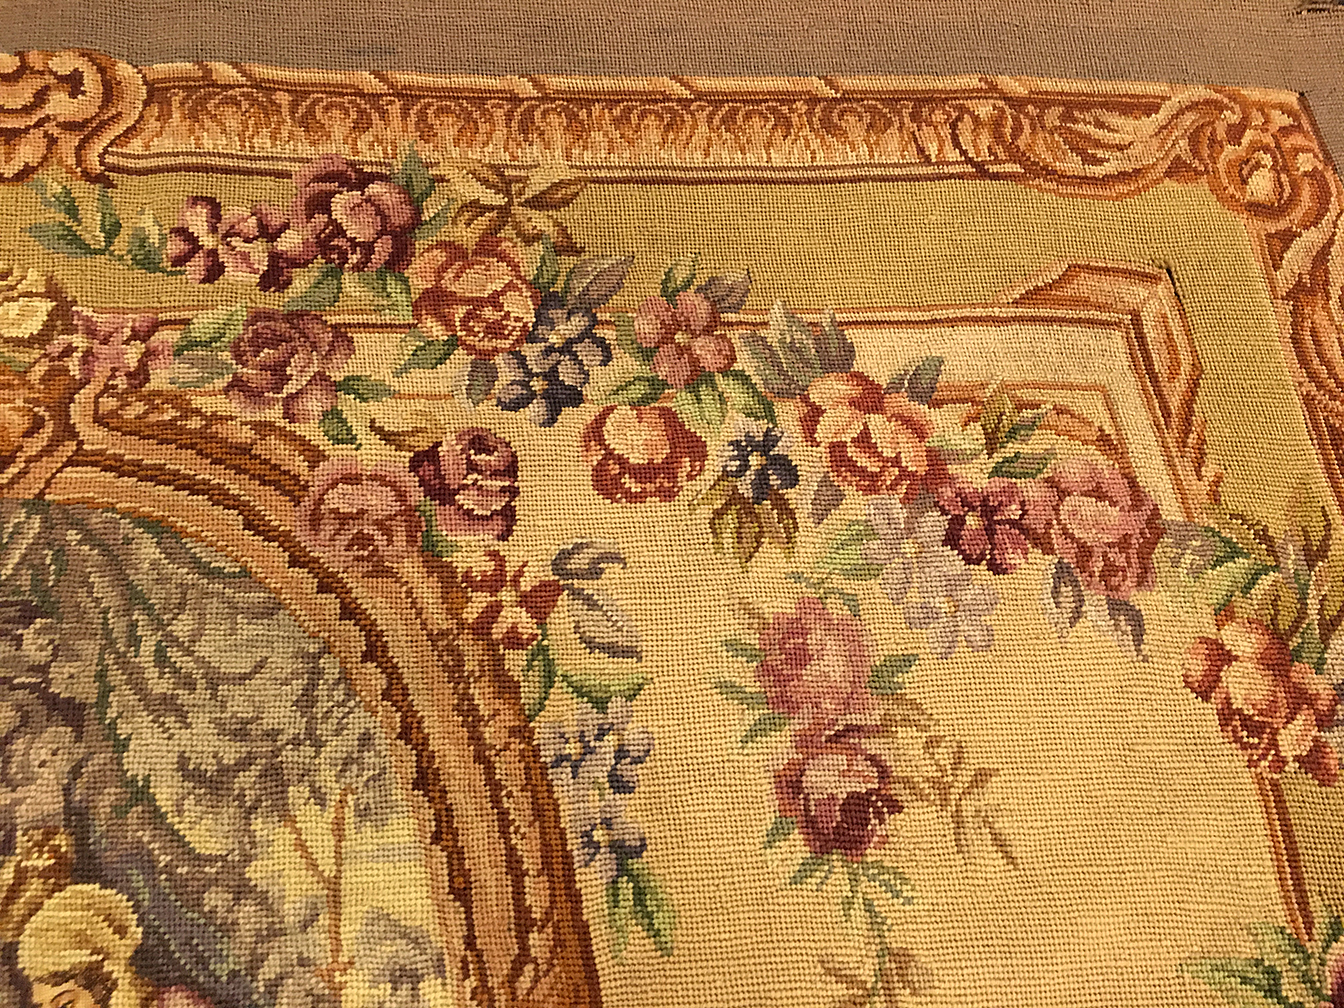 Antique tapestry - # 53276